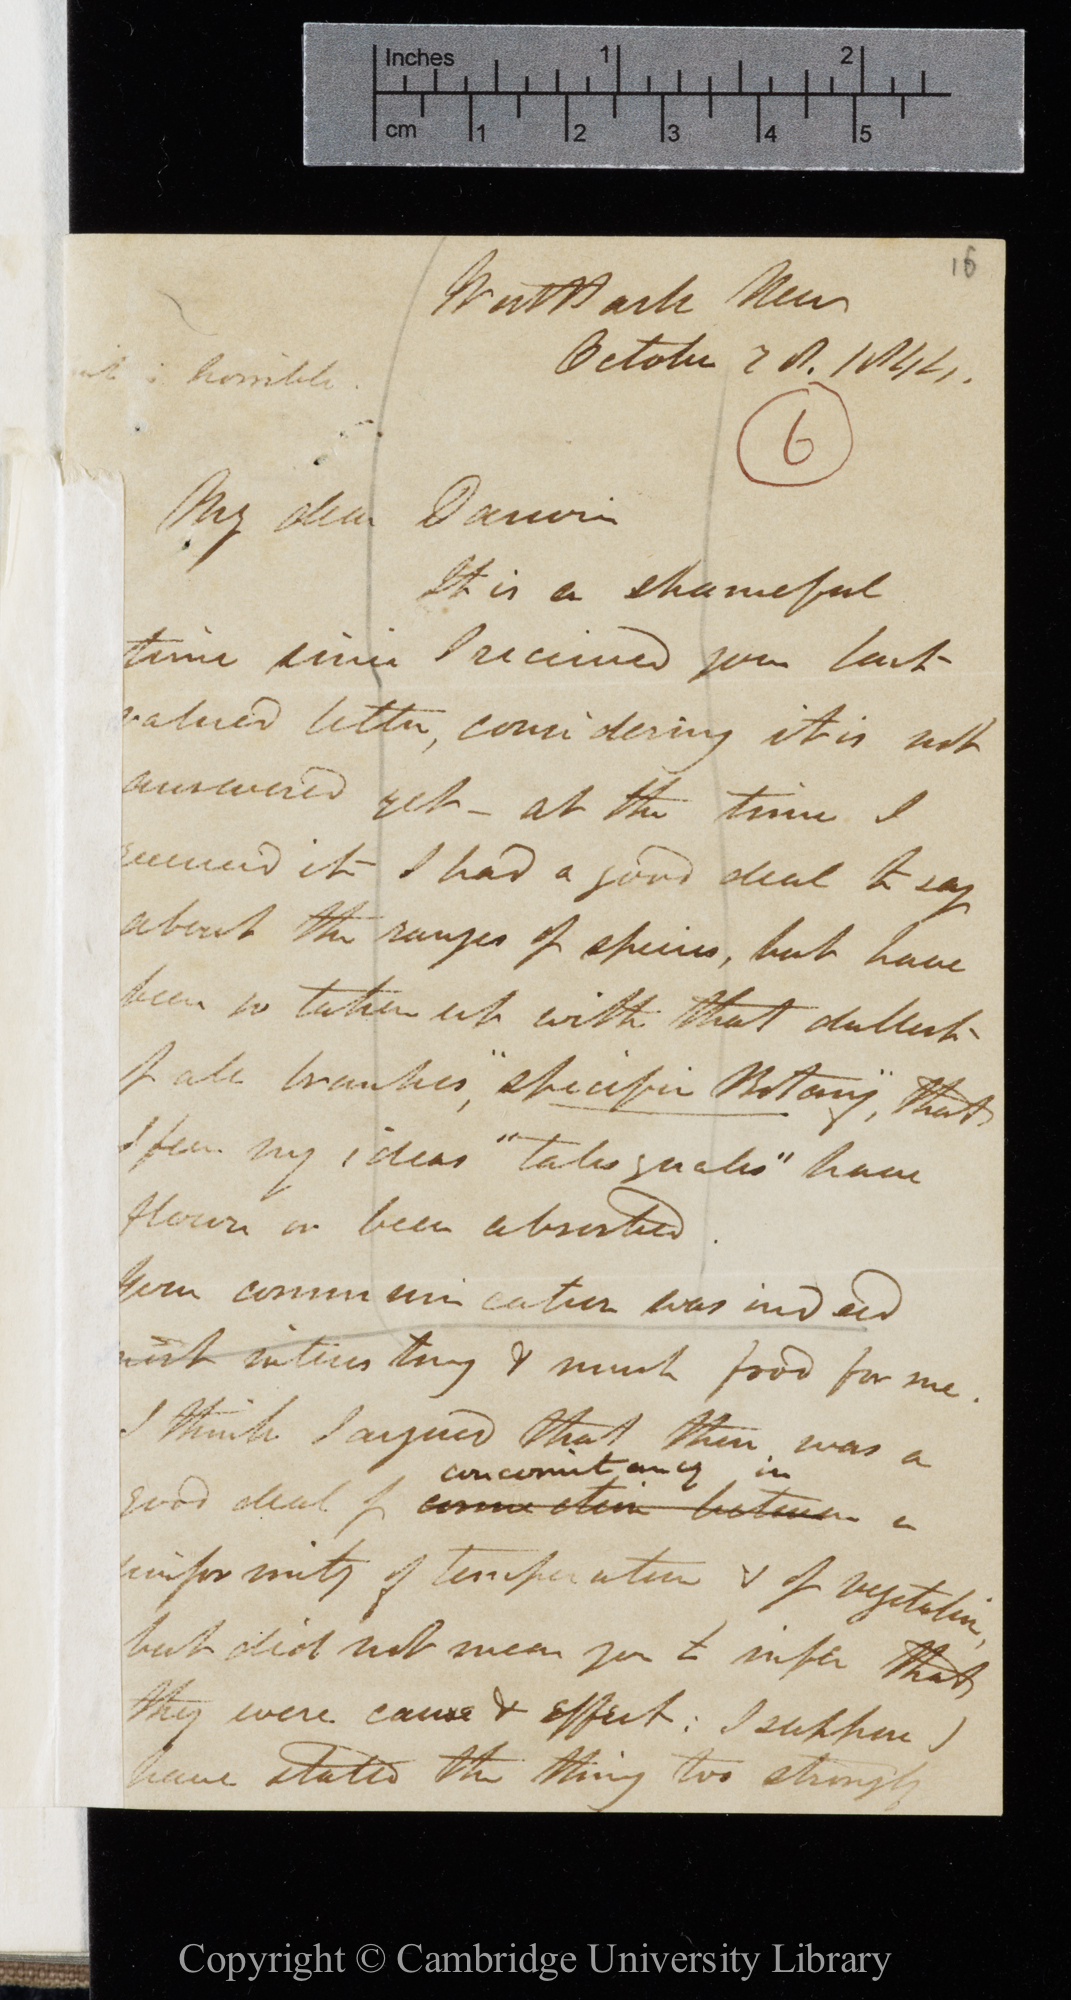 Letter from J. D. Hooker to C. R. Darwin   28 October 1844